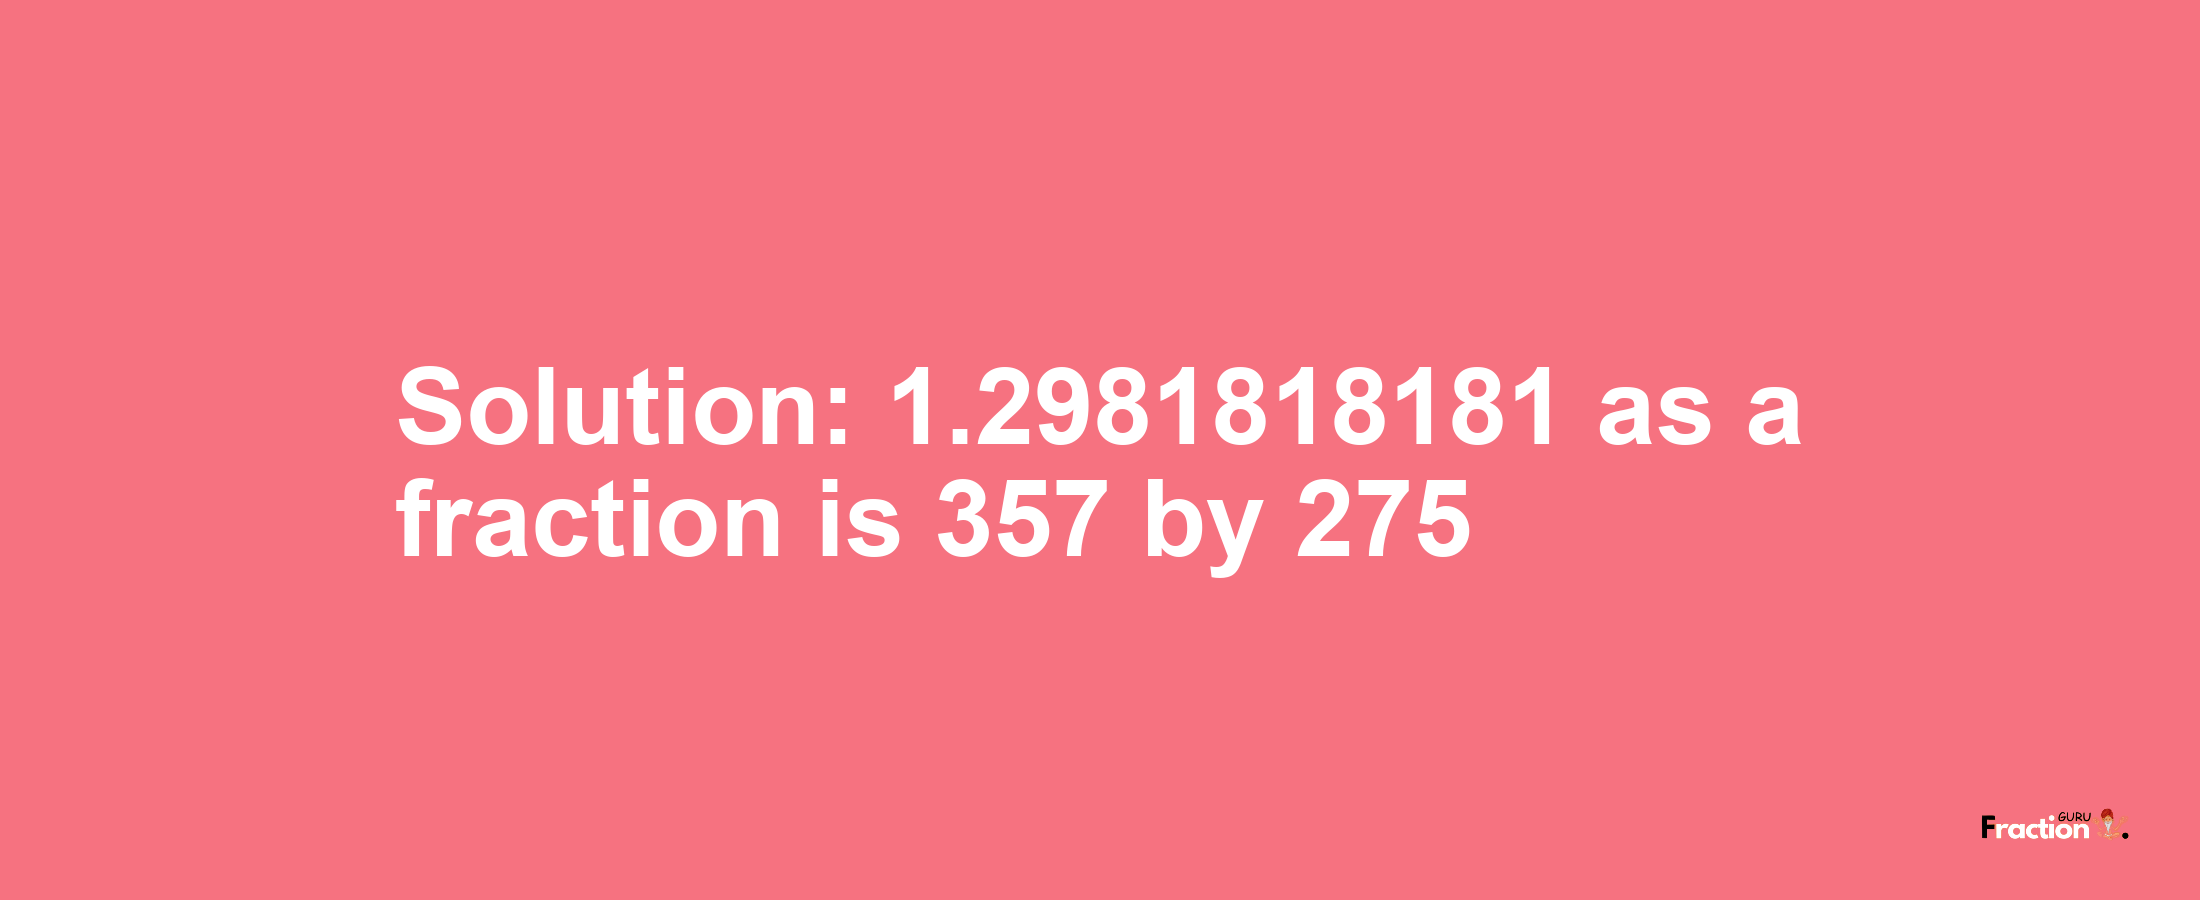 Solution:1.2981818181 as a fraction is 357/275